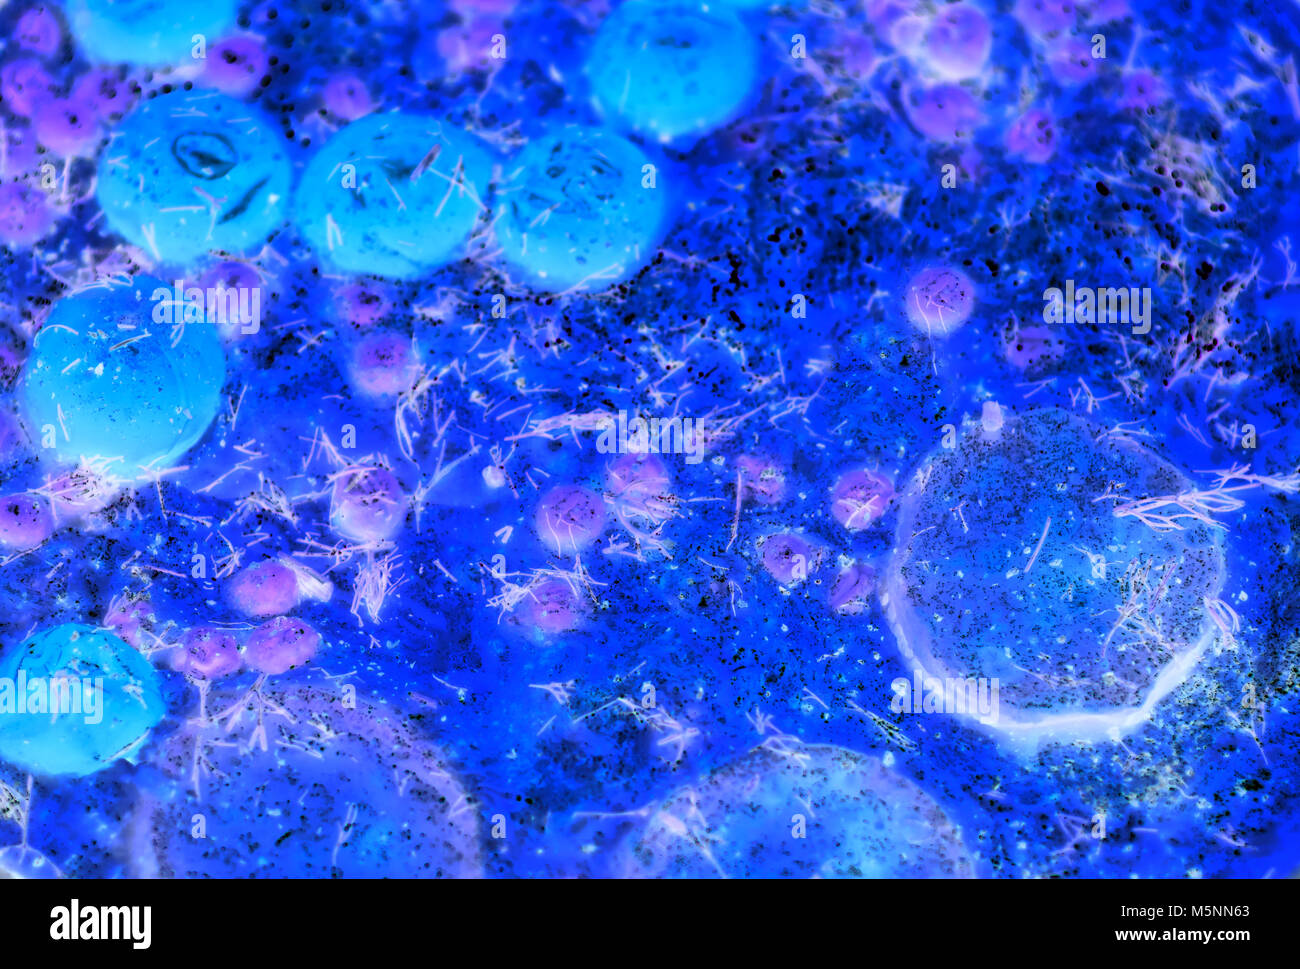 Abstract background with rounded substance in blue ocean of strange essence Stock Photo